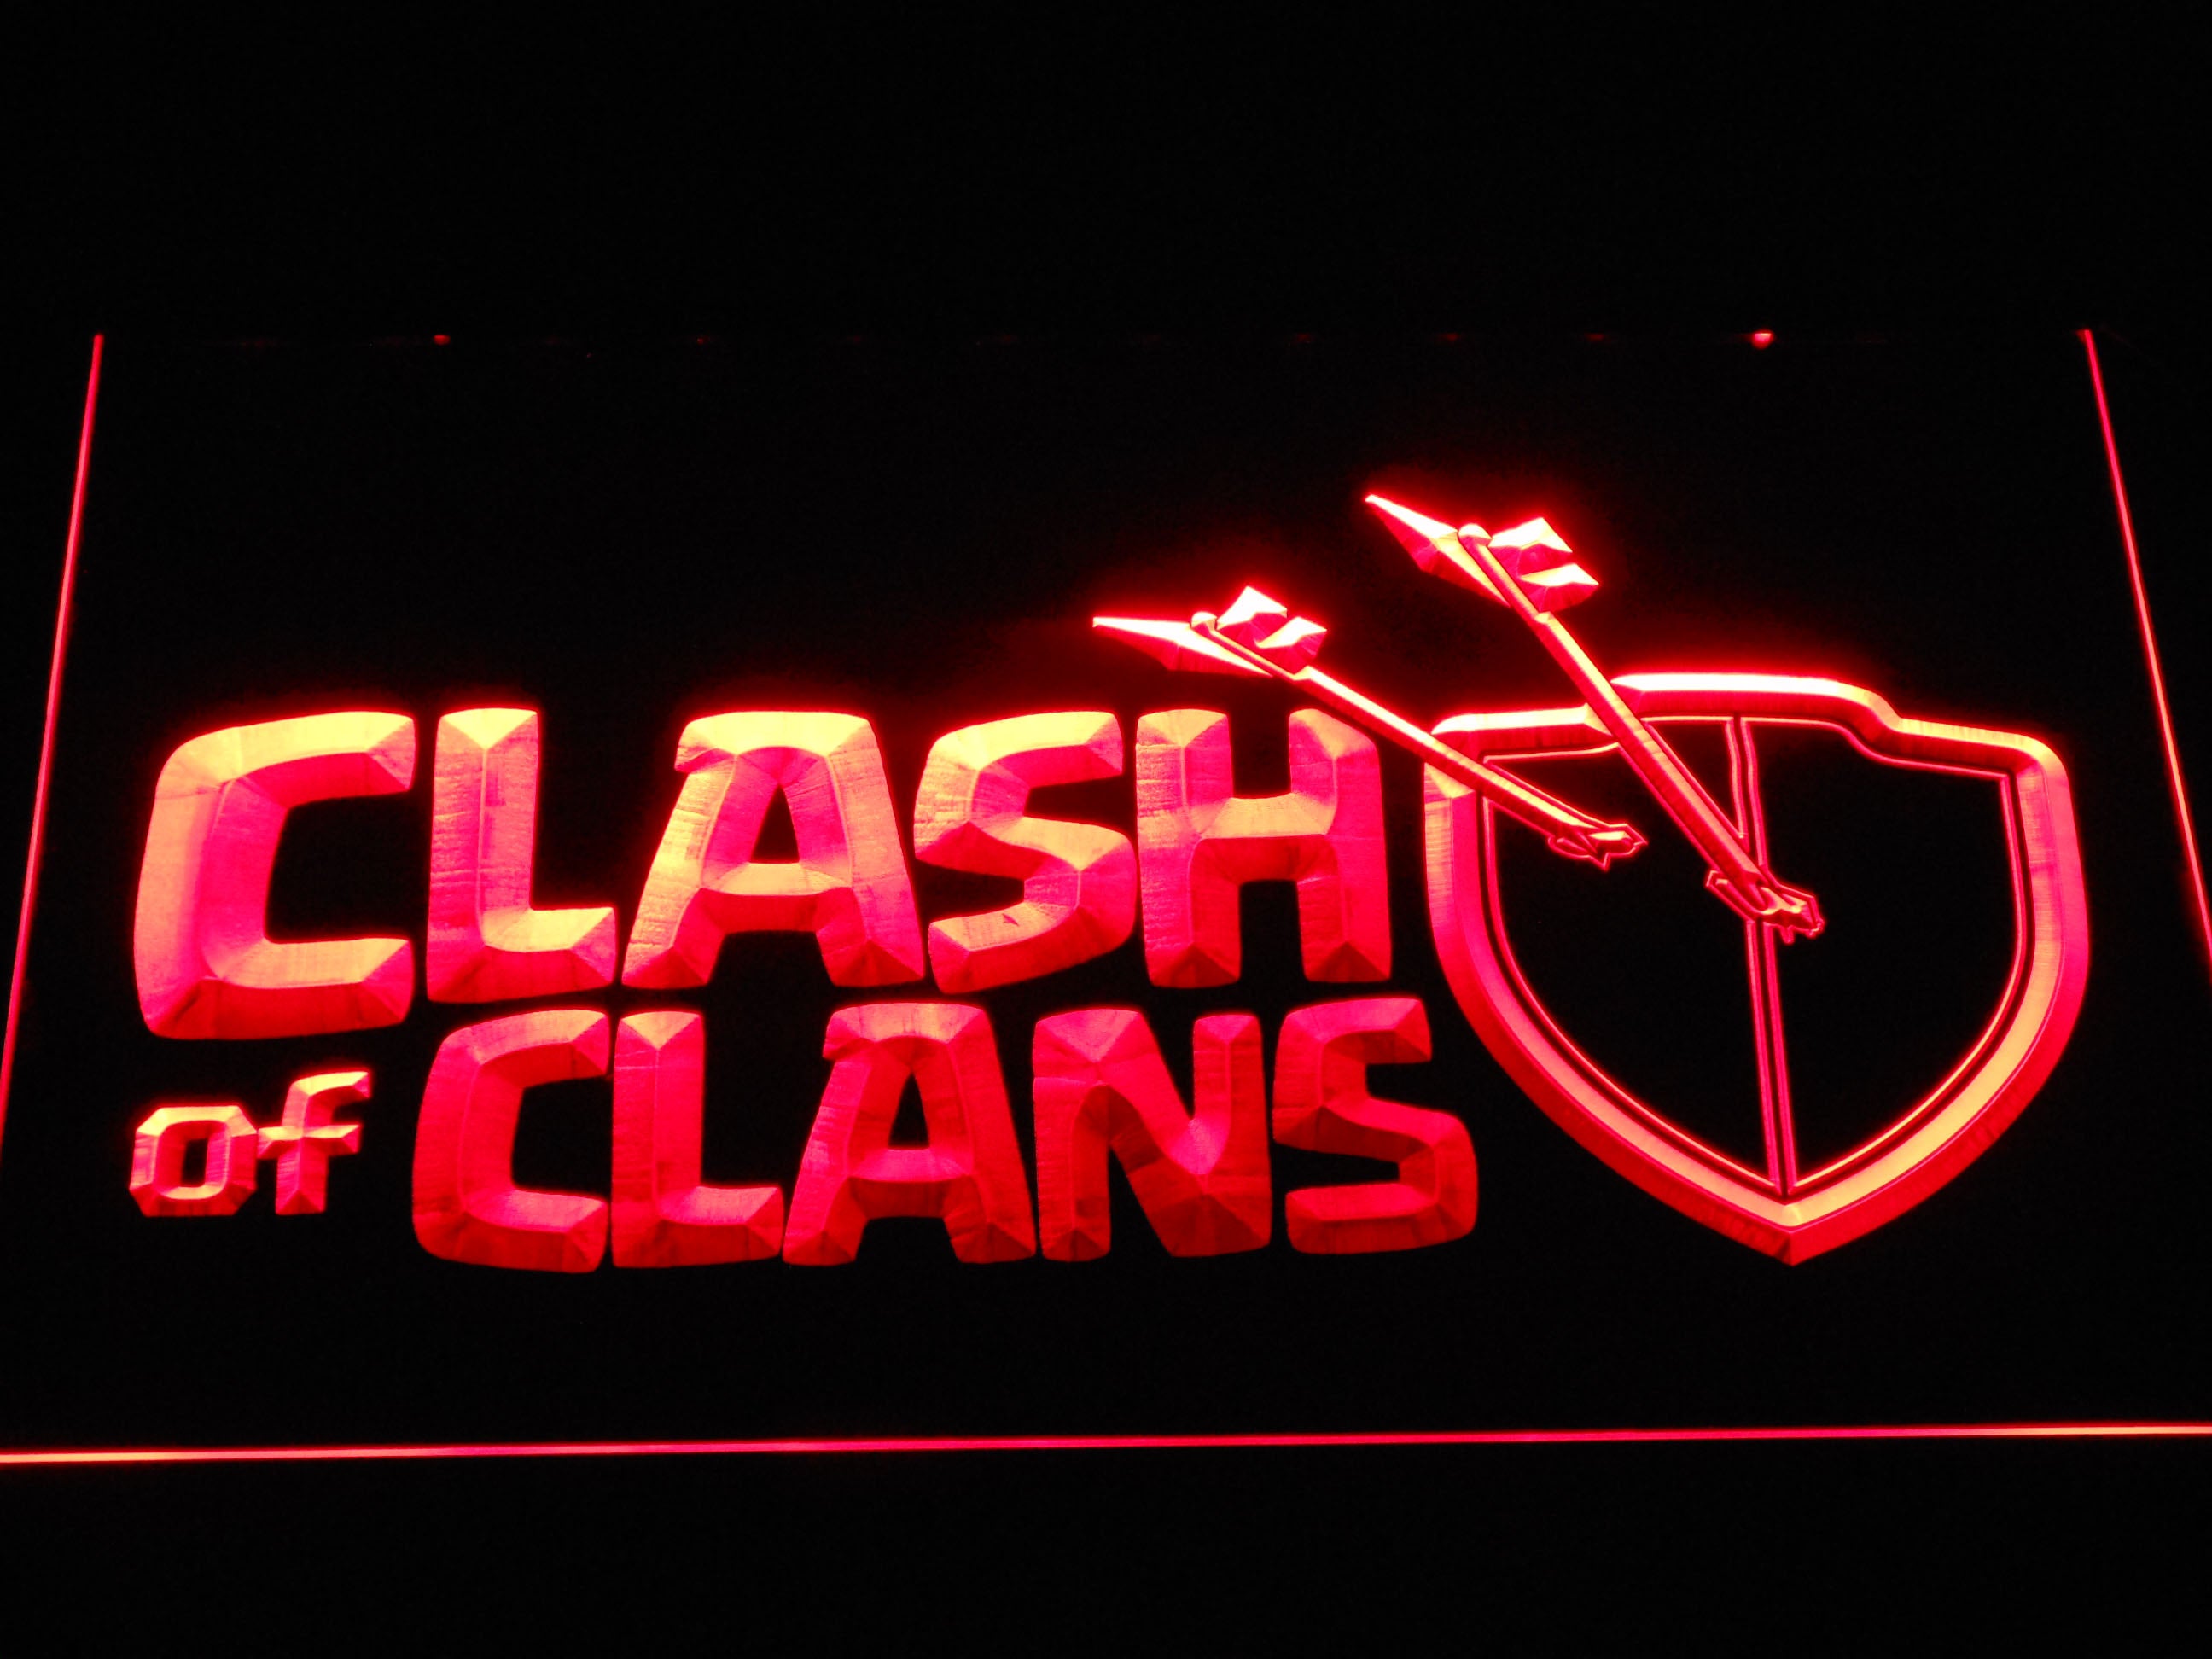 Clash of Clans Neon Light LED Sign